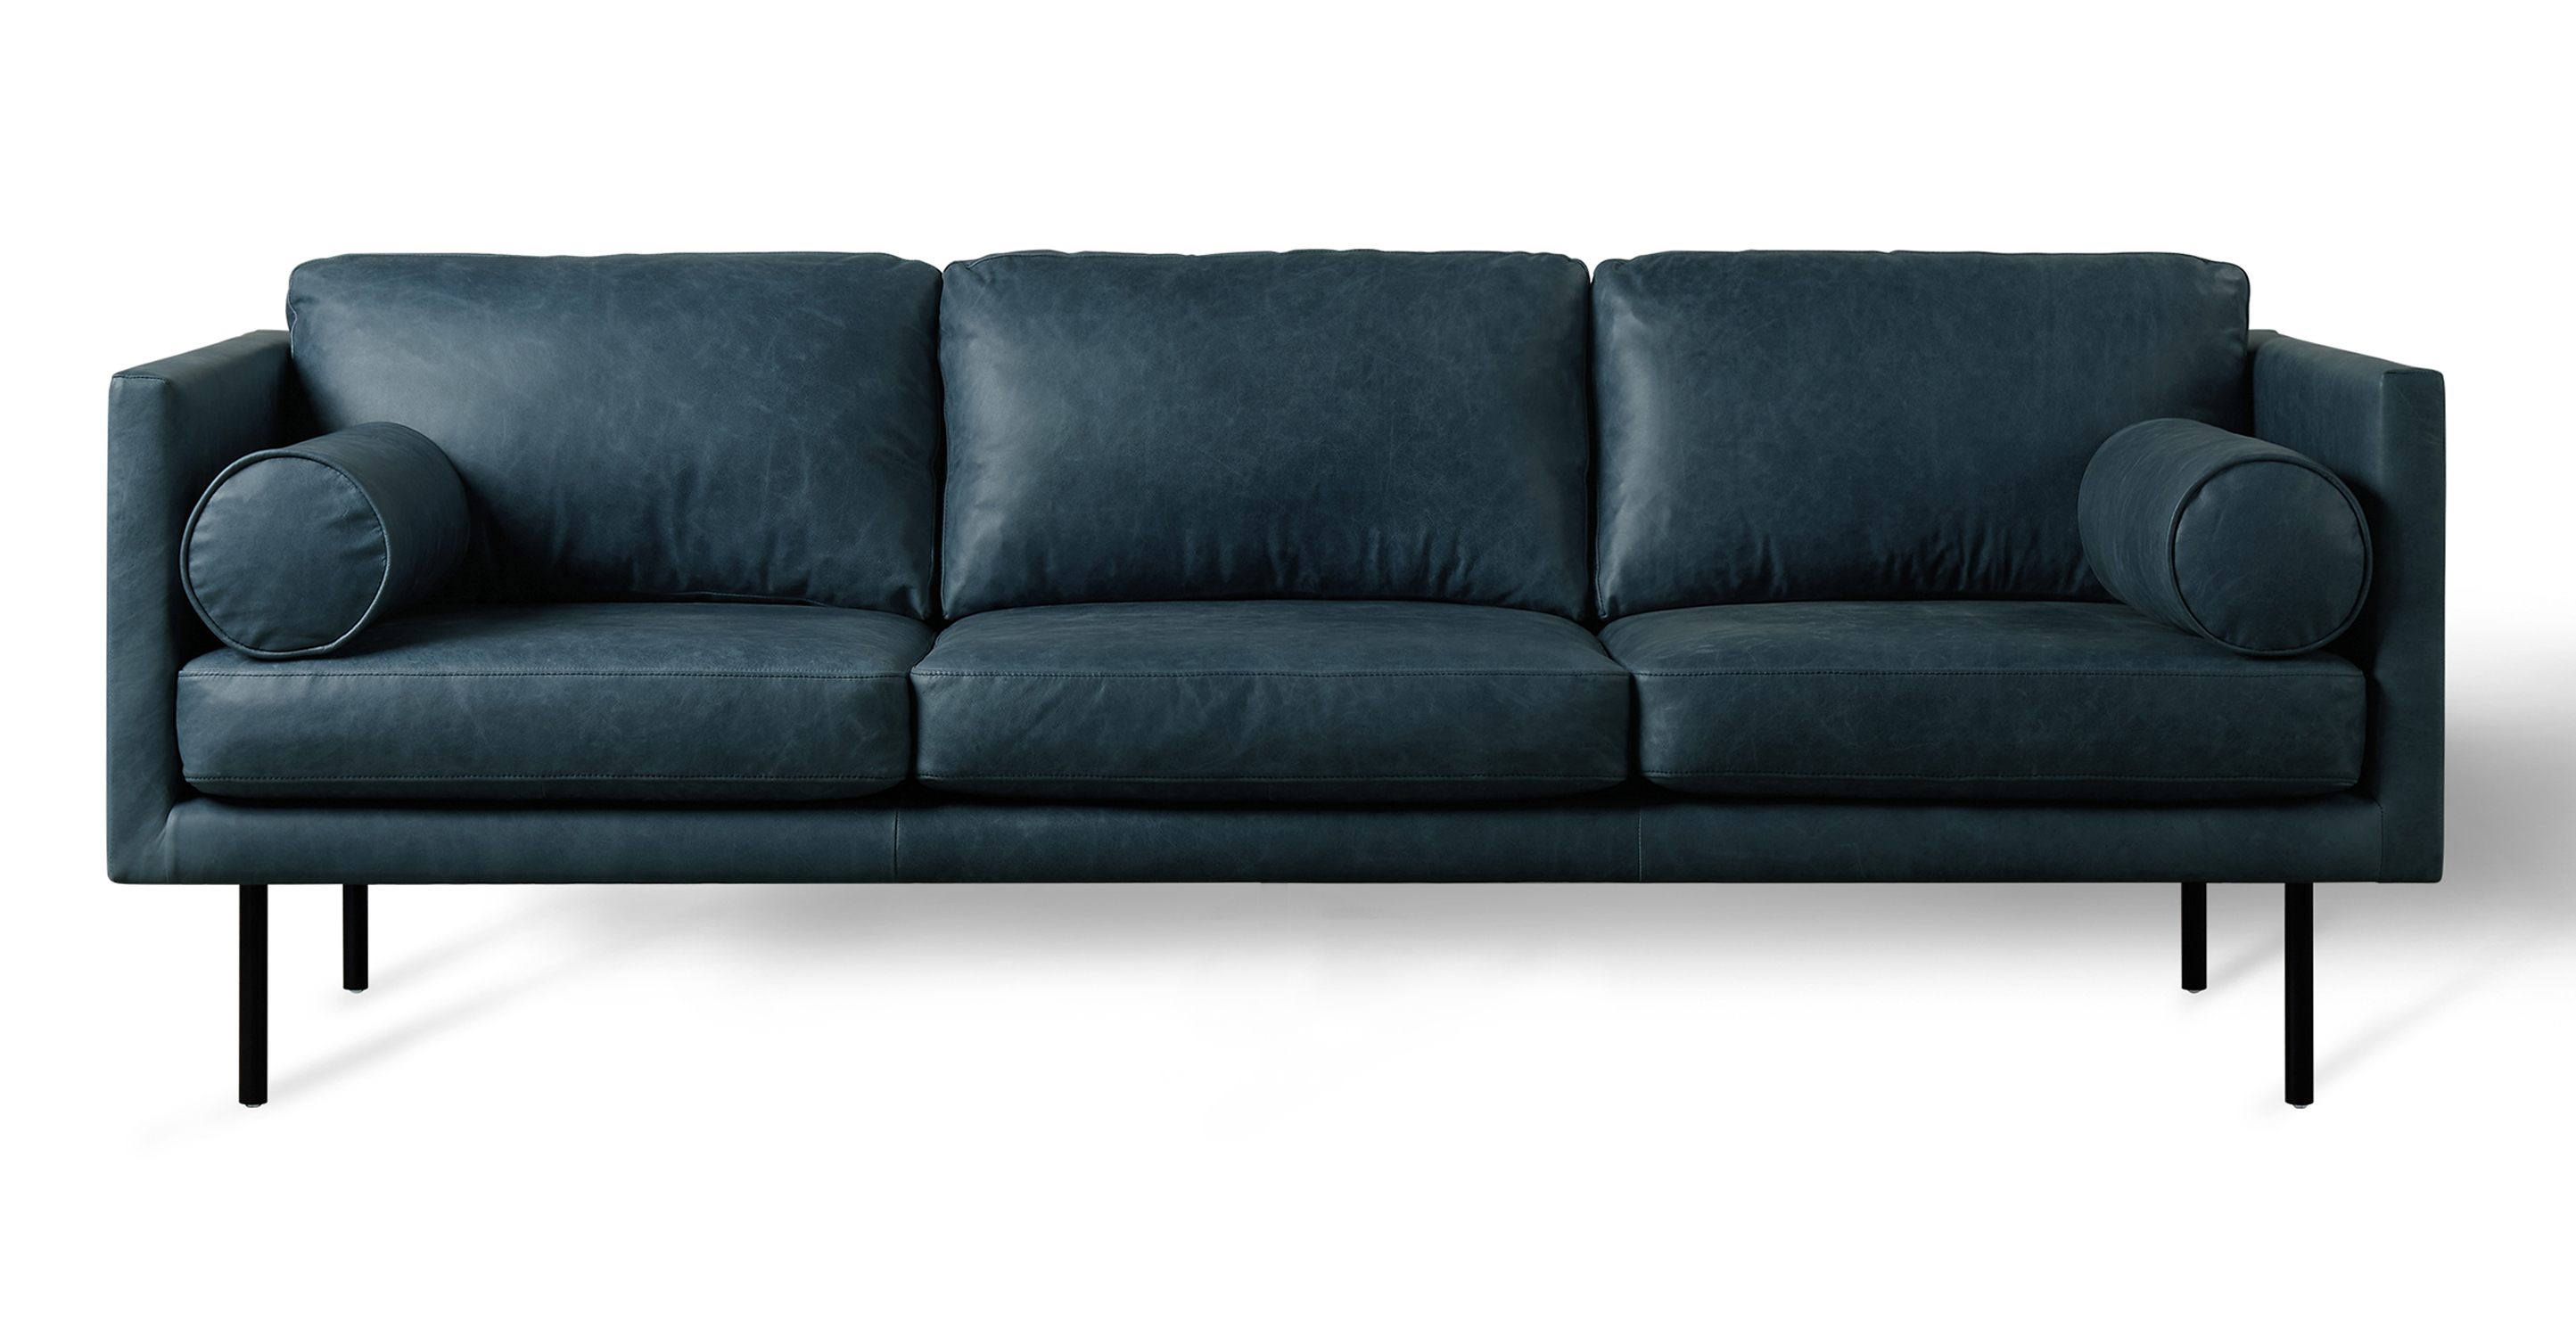 The Spectre Midnight Blue Leather is a timeless contemporary sofa that is 100% upholstered. It features a cohesive design with both the base frame and arms sharing the same thickness, resulting in a harmonious and consistent look. The sofa's three seat and back cushions are removable and strike a balance between being well-cushioned and not overly stuffed. To further enhance comfort, the Spectre includes two bolster pillows positioned on either side of the arm. The sofa is raised by tapered wooden legs.